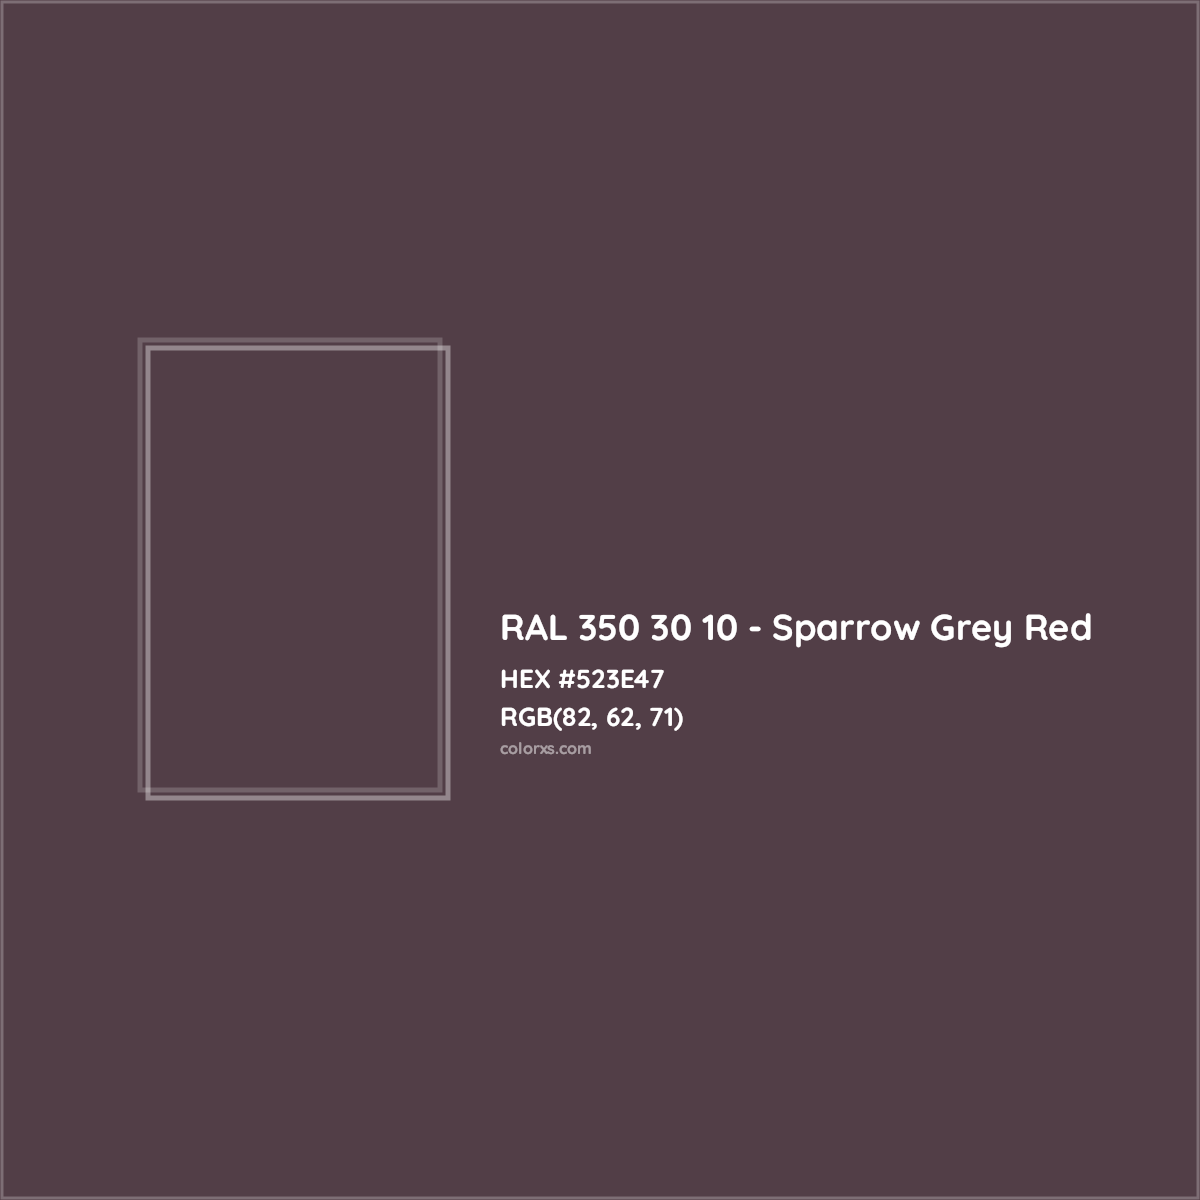 HEX #523E47 RAL 350 30 10 - Sparrow Grey Red CMS RAL Design - Color Code